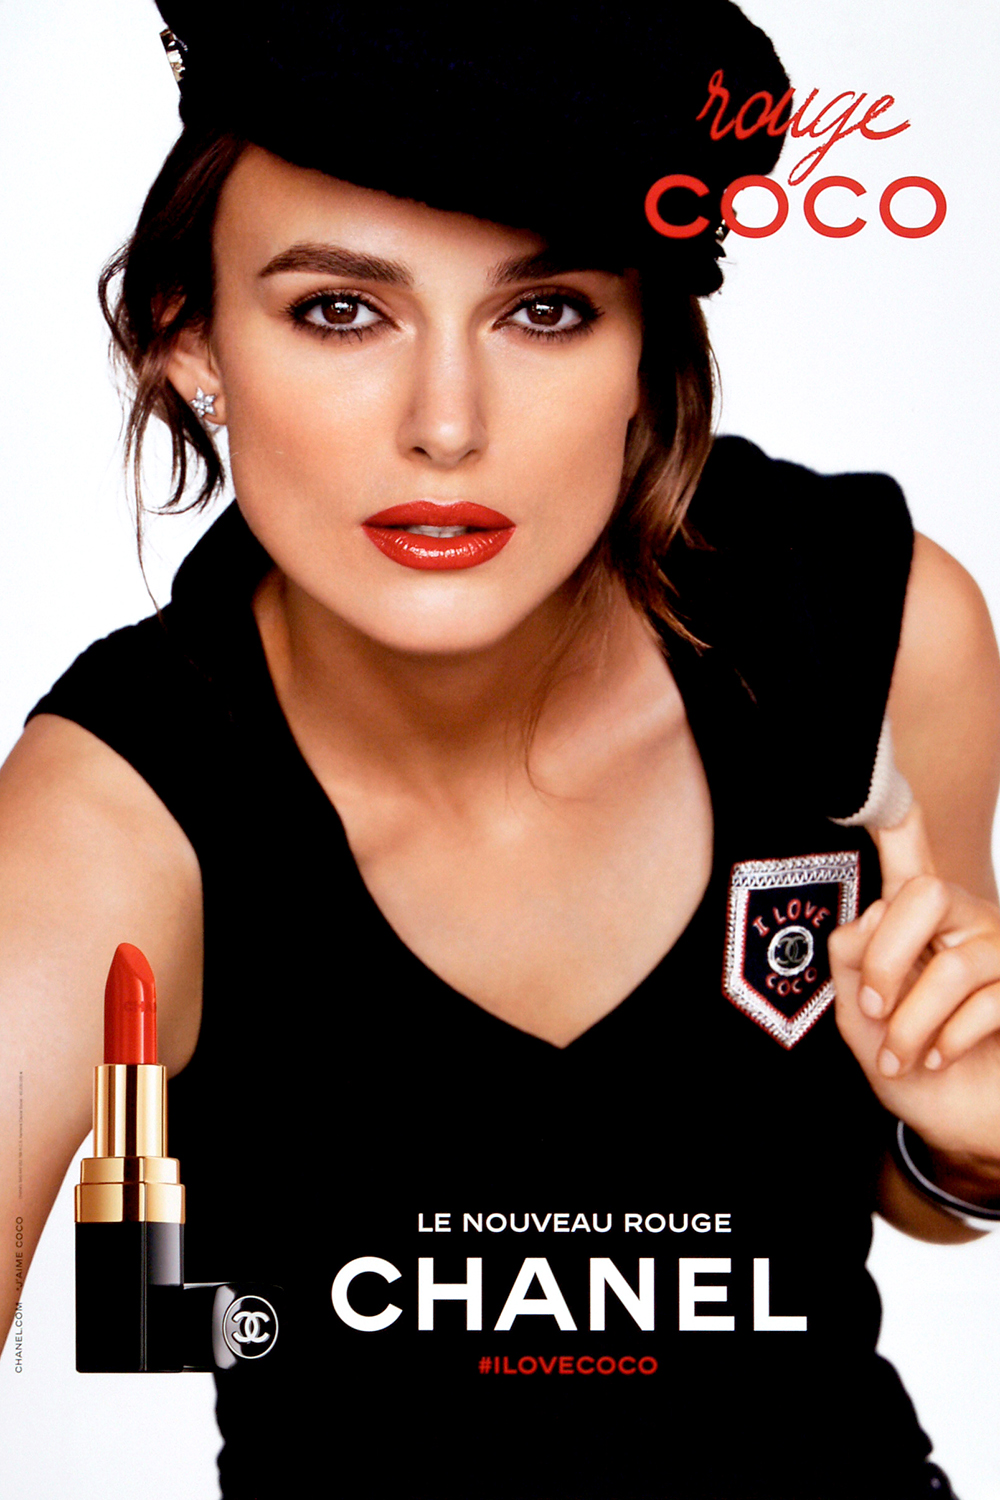 chanel-rouge-a-levres-keira-knightley-publicite-marketing-luxe-2016